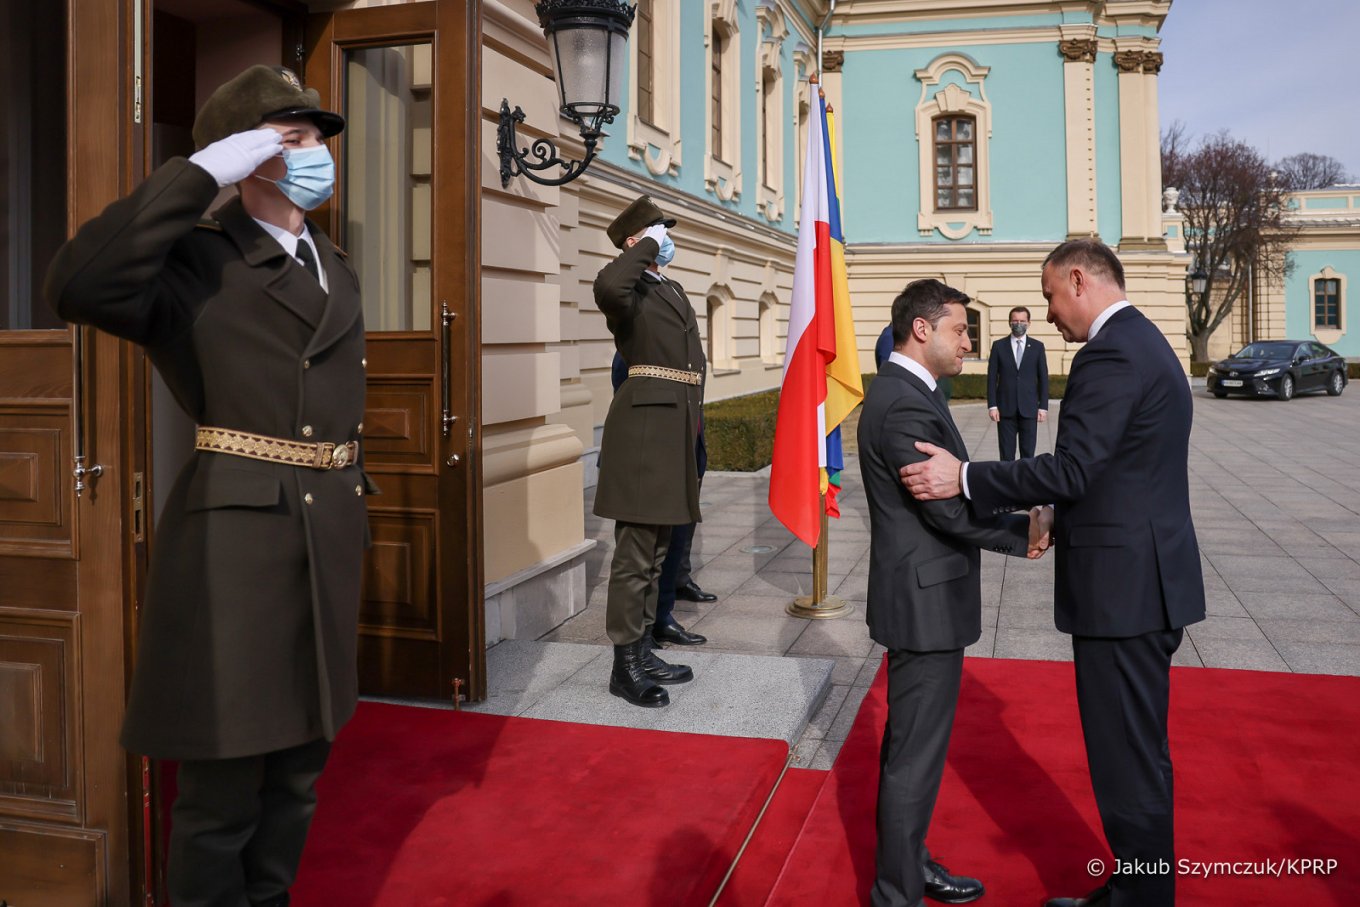 President Andrzej Duda with President Volodymyr Zelensky during his visit to Kiev on February 23 this year.